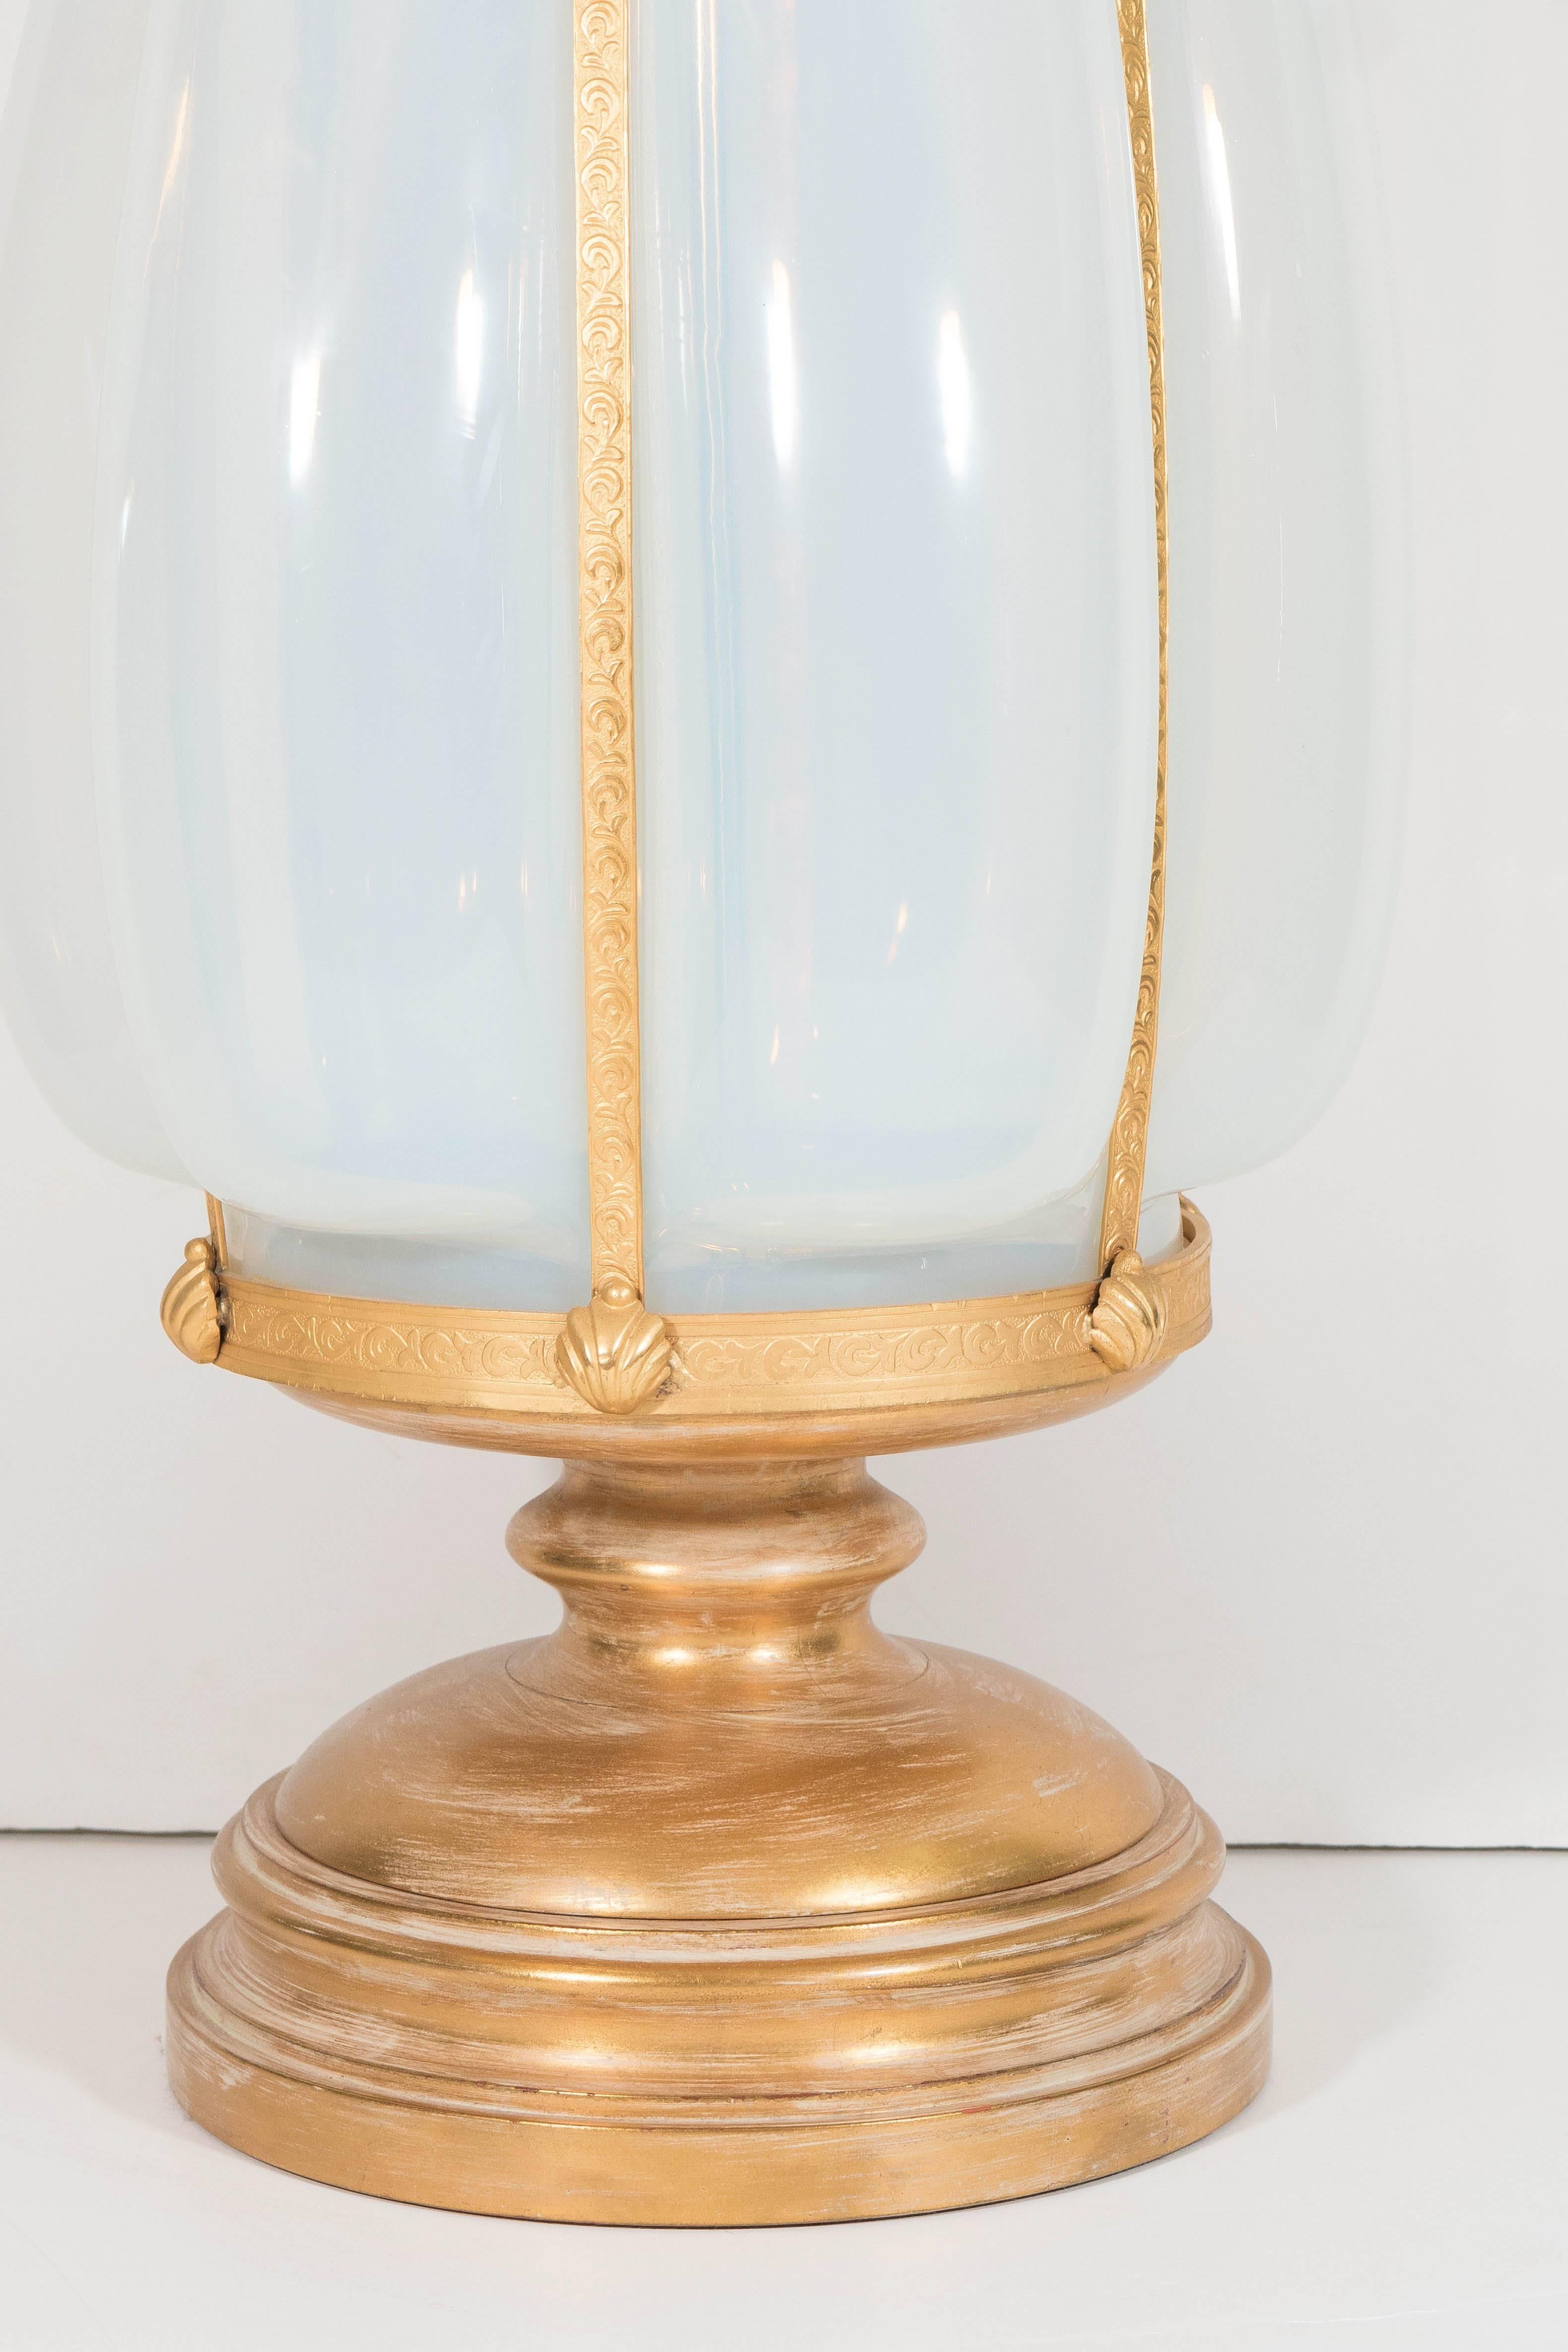 A vintage large-scale Italian table lamp, produced circa 1950s, featuring the original pointed finial, surmounting an opaline glass body, inset within gilded mounting, detailed with acanthus leaves and shells. Wiring and sockets to US standard,